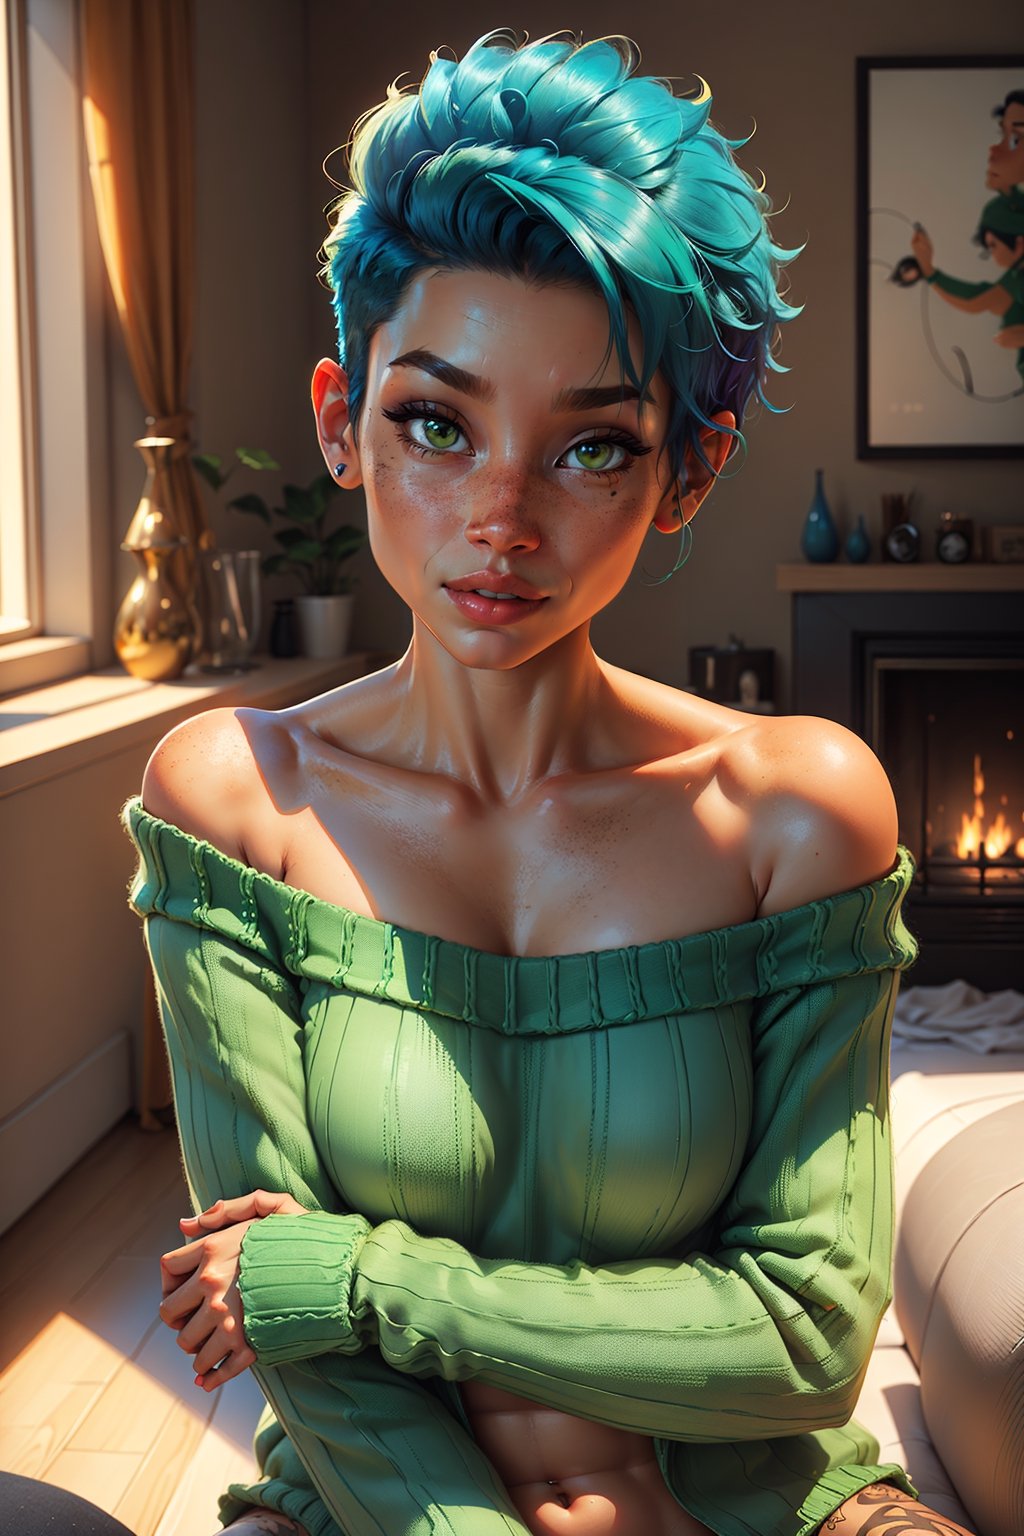 Style: disney, (pixar), 3d, cartoon, realistic, realism, (epic:1.2), trending on artstation, (high quality:1.2), (masterpiece:1.2) , (8k resolution) , high details, incredibly absurdres, color connection, colorized, colorful, sexy, nsfw, seductive),
(1girl mid twenty, latina face, freckles, (blue short hair), shaved sides, medium breasts, tattooed,  sw3ater, (green sweater:1.22), off-shoulder sweater, fuzzy sweater,
(Backround: cozy, wholsome, warm, living room)
